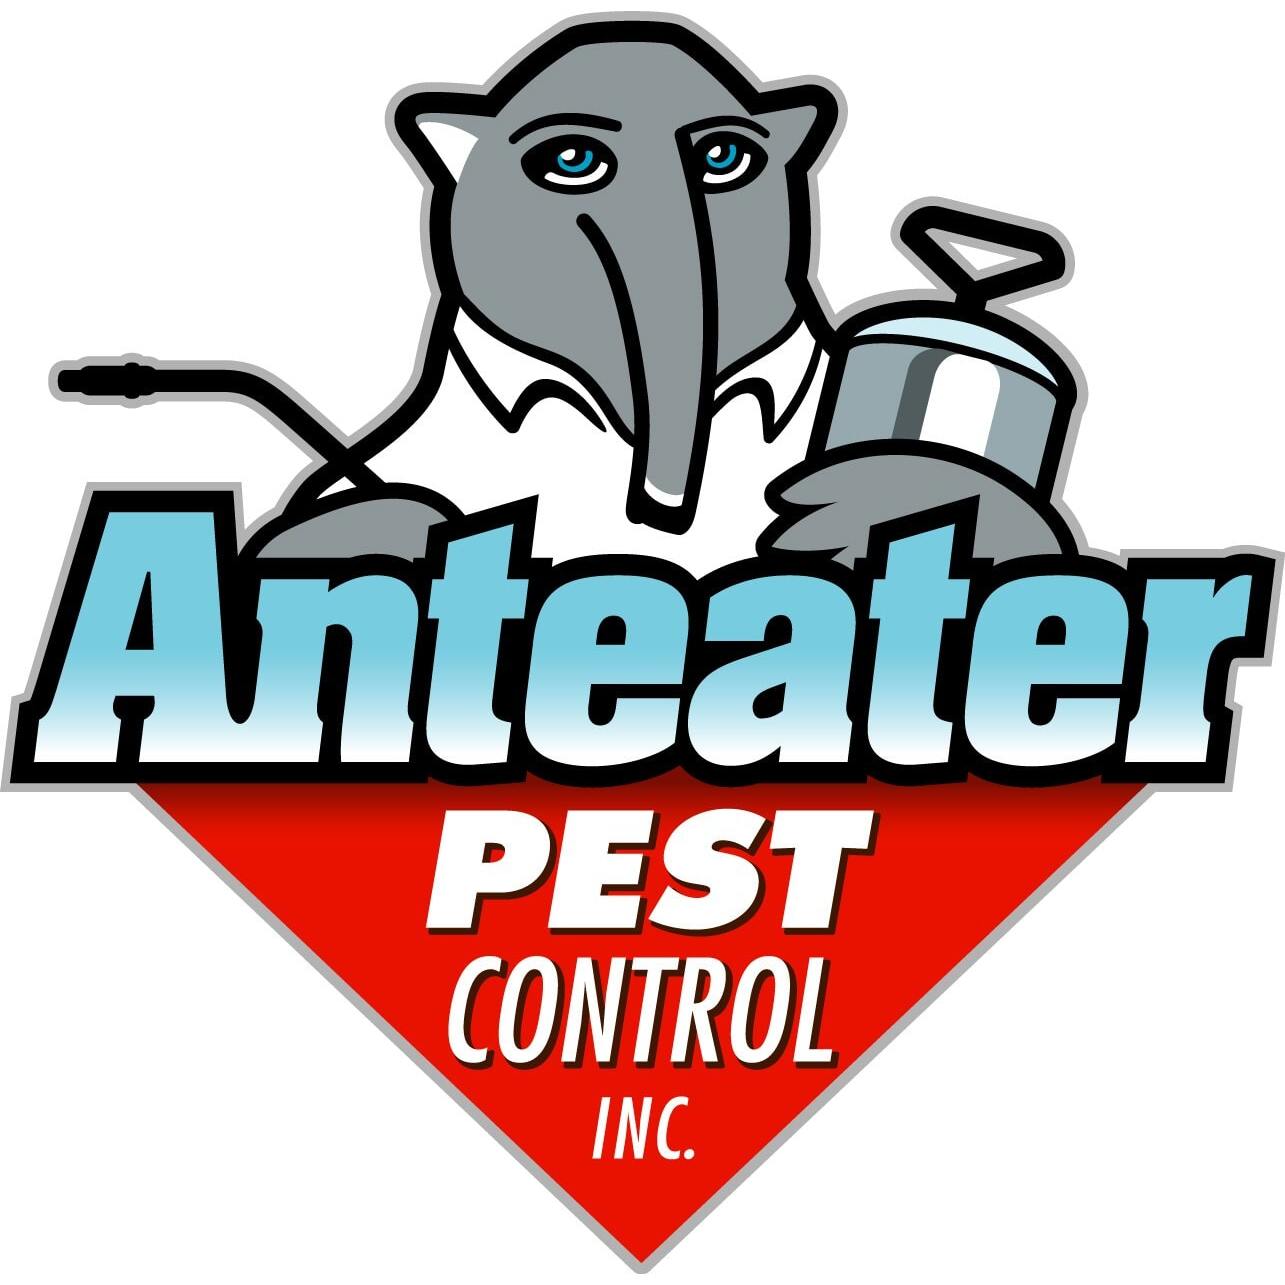 Anteater pest control - Waterford, MI 48327 - (248)666-5357 | ShowMeLocal.com